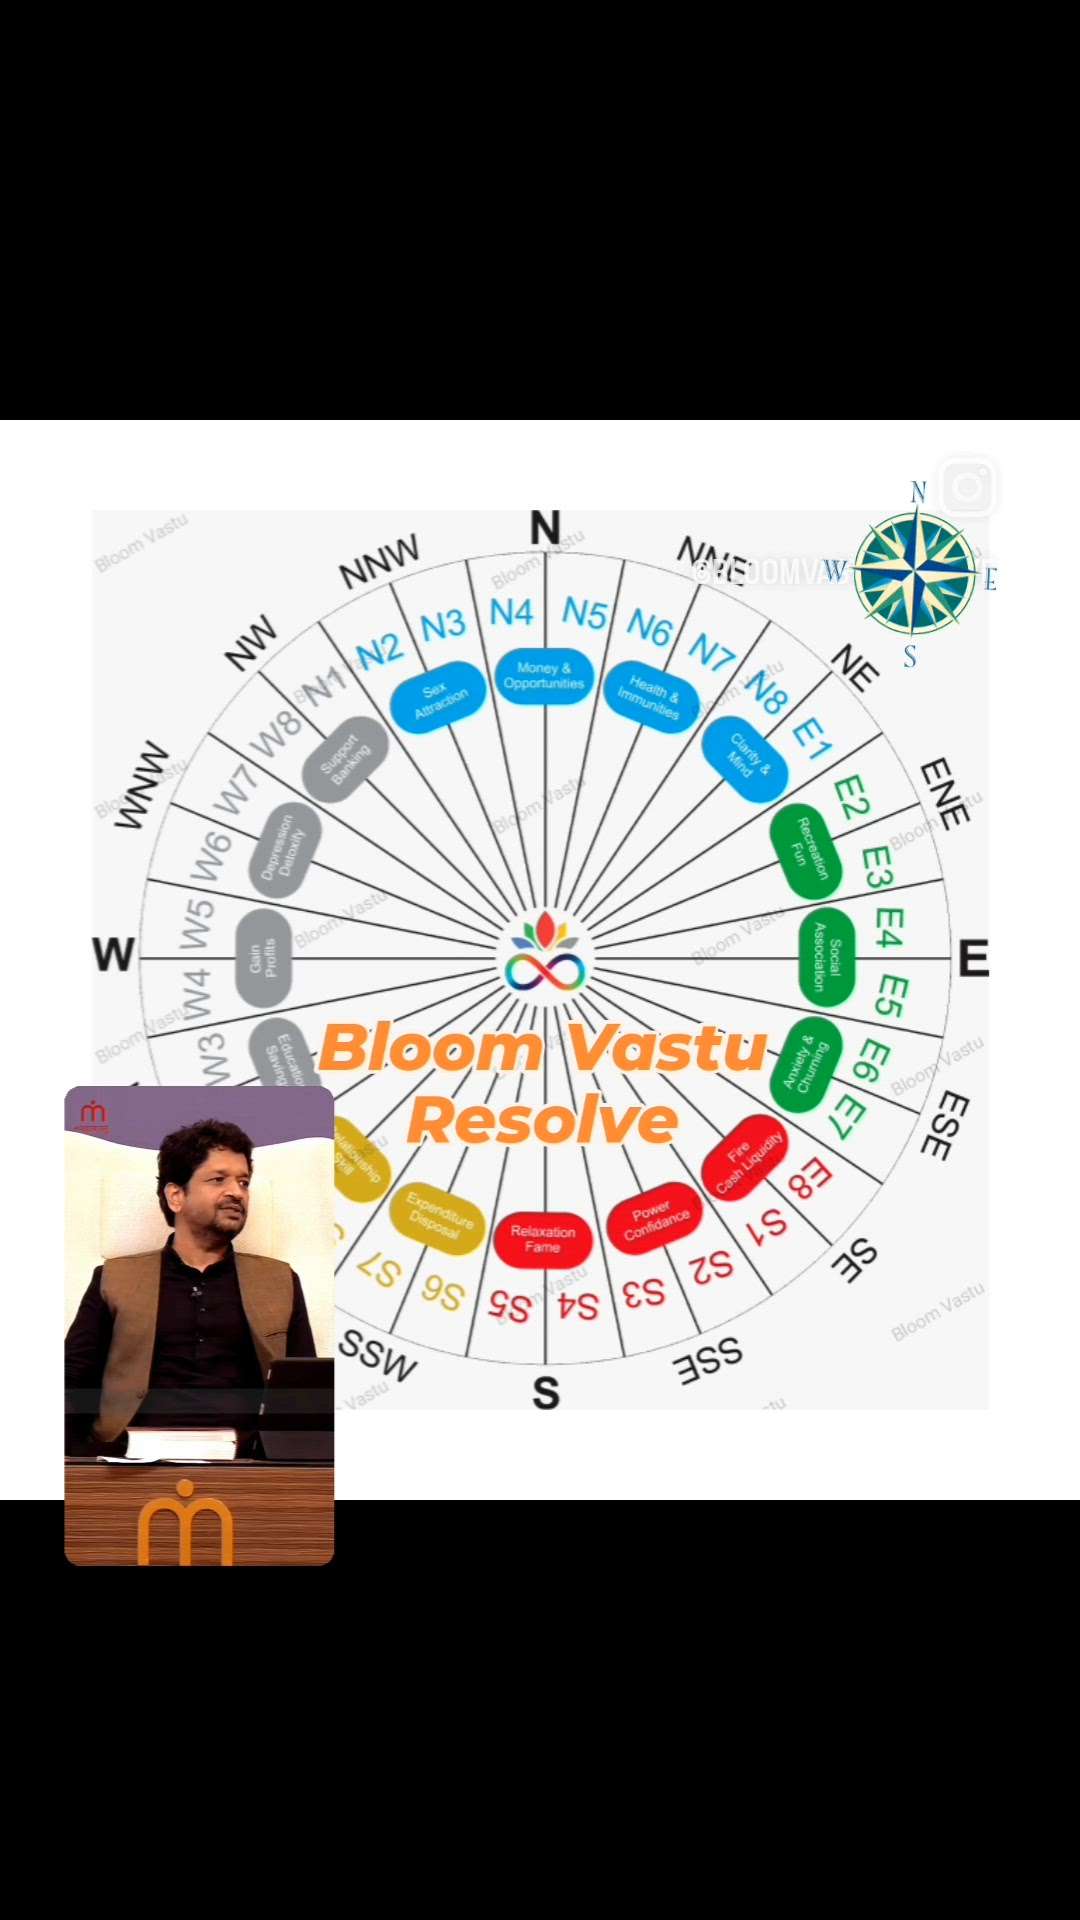 Your queries and comments are always welcome.
For more Vastu please follow @bloomvasturesolve
on YouTube, Instagram & Facebook
.
.
For personal consultation, feel free to contact certified MahaVastu Expert through
M - 9826592271
Or
bloomvasturesolve@gmail.com
#vastu #वास्तु #mahavastu #mahavastuexpert #bloomvasturesolve  #vastureels #vastulogy #vastuexpert  #vasturemedies  #vastuforhome #vastuforpeace #vastudosh #numerology #vastuforgrowth #numerology #nwzone #vastuforsocialconnection #eastzone #powerbank